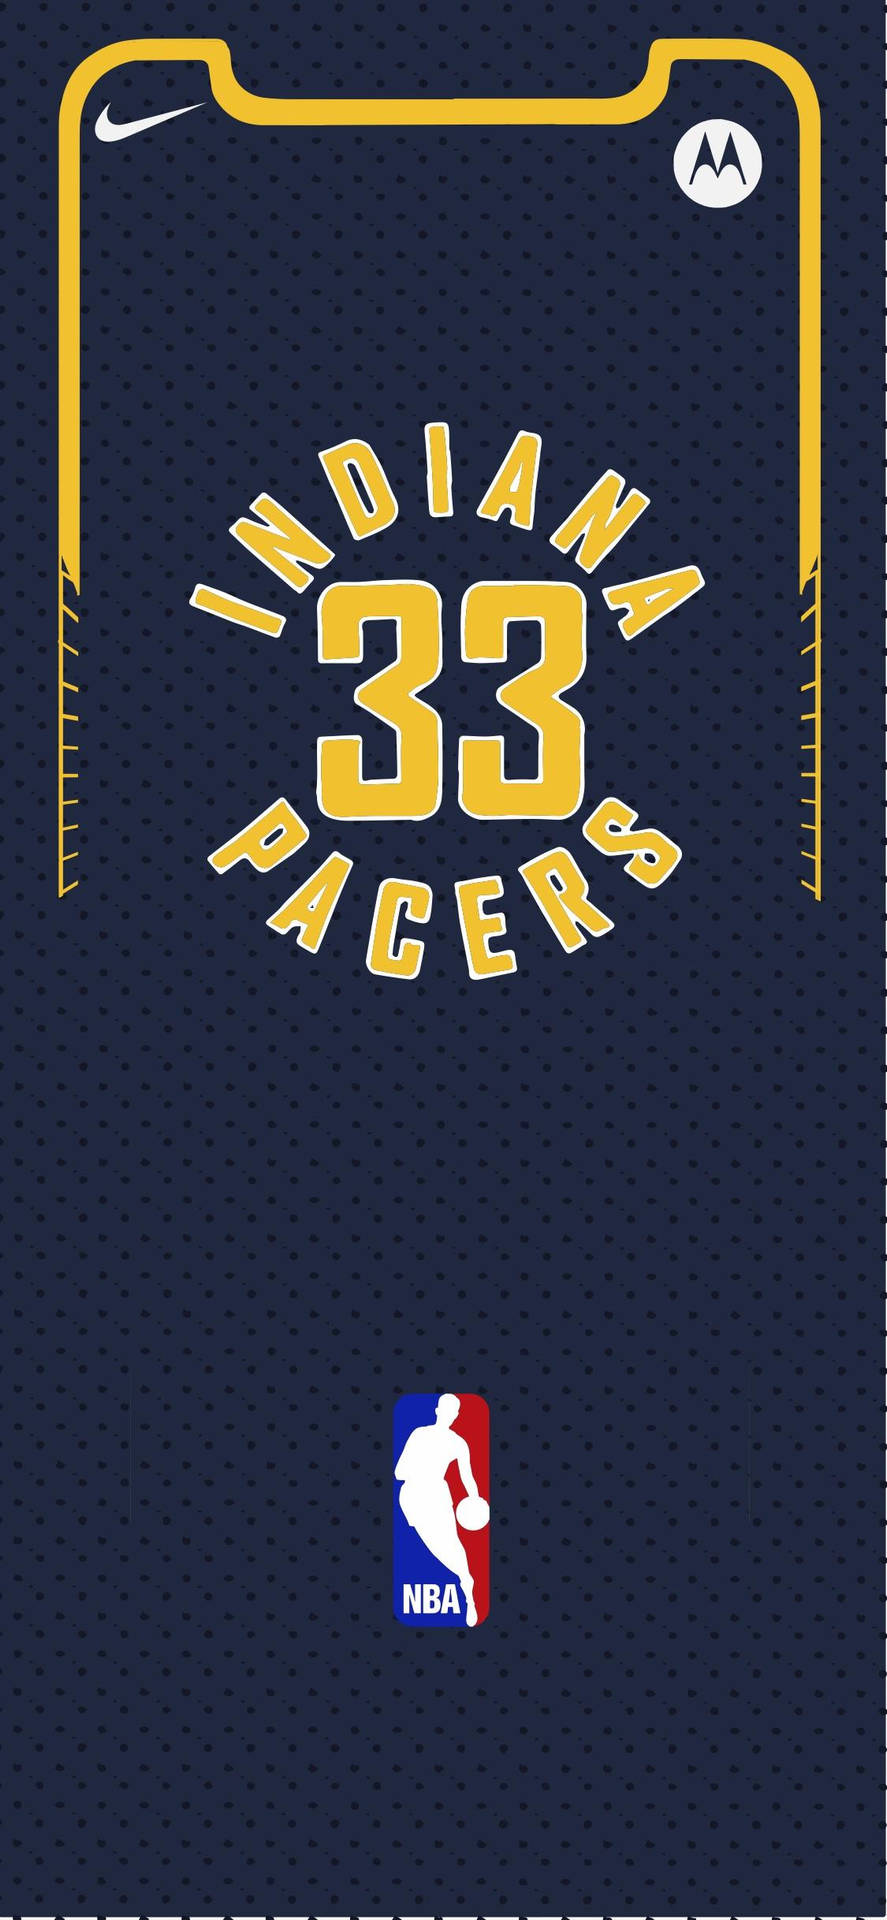 Indiana Pacers Jersey Illustration